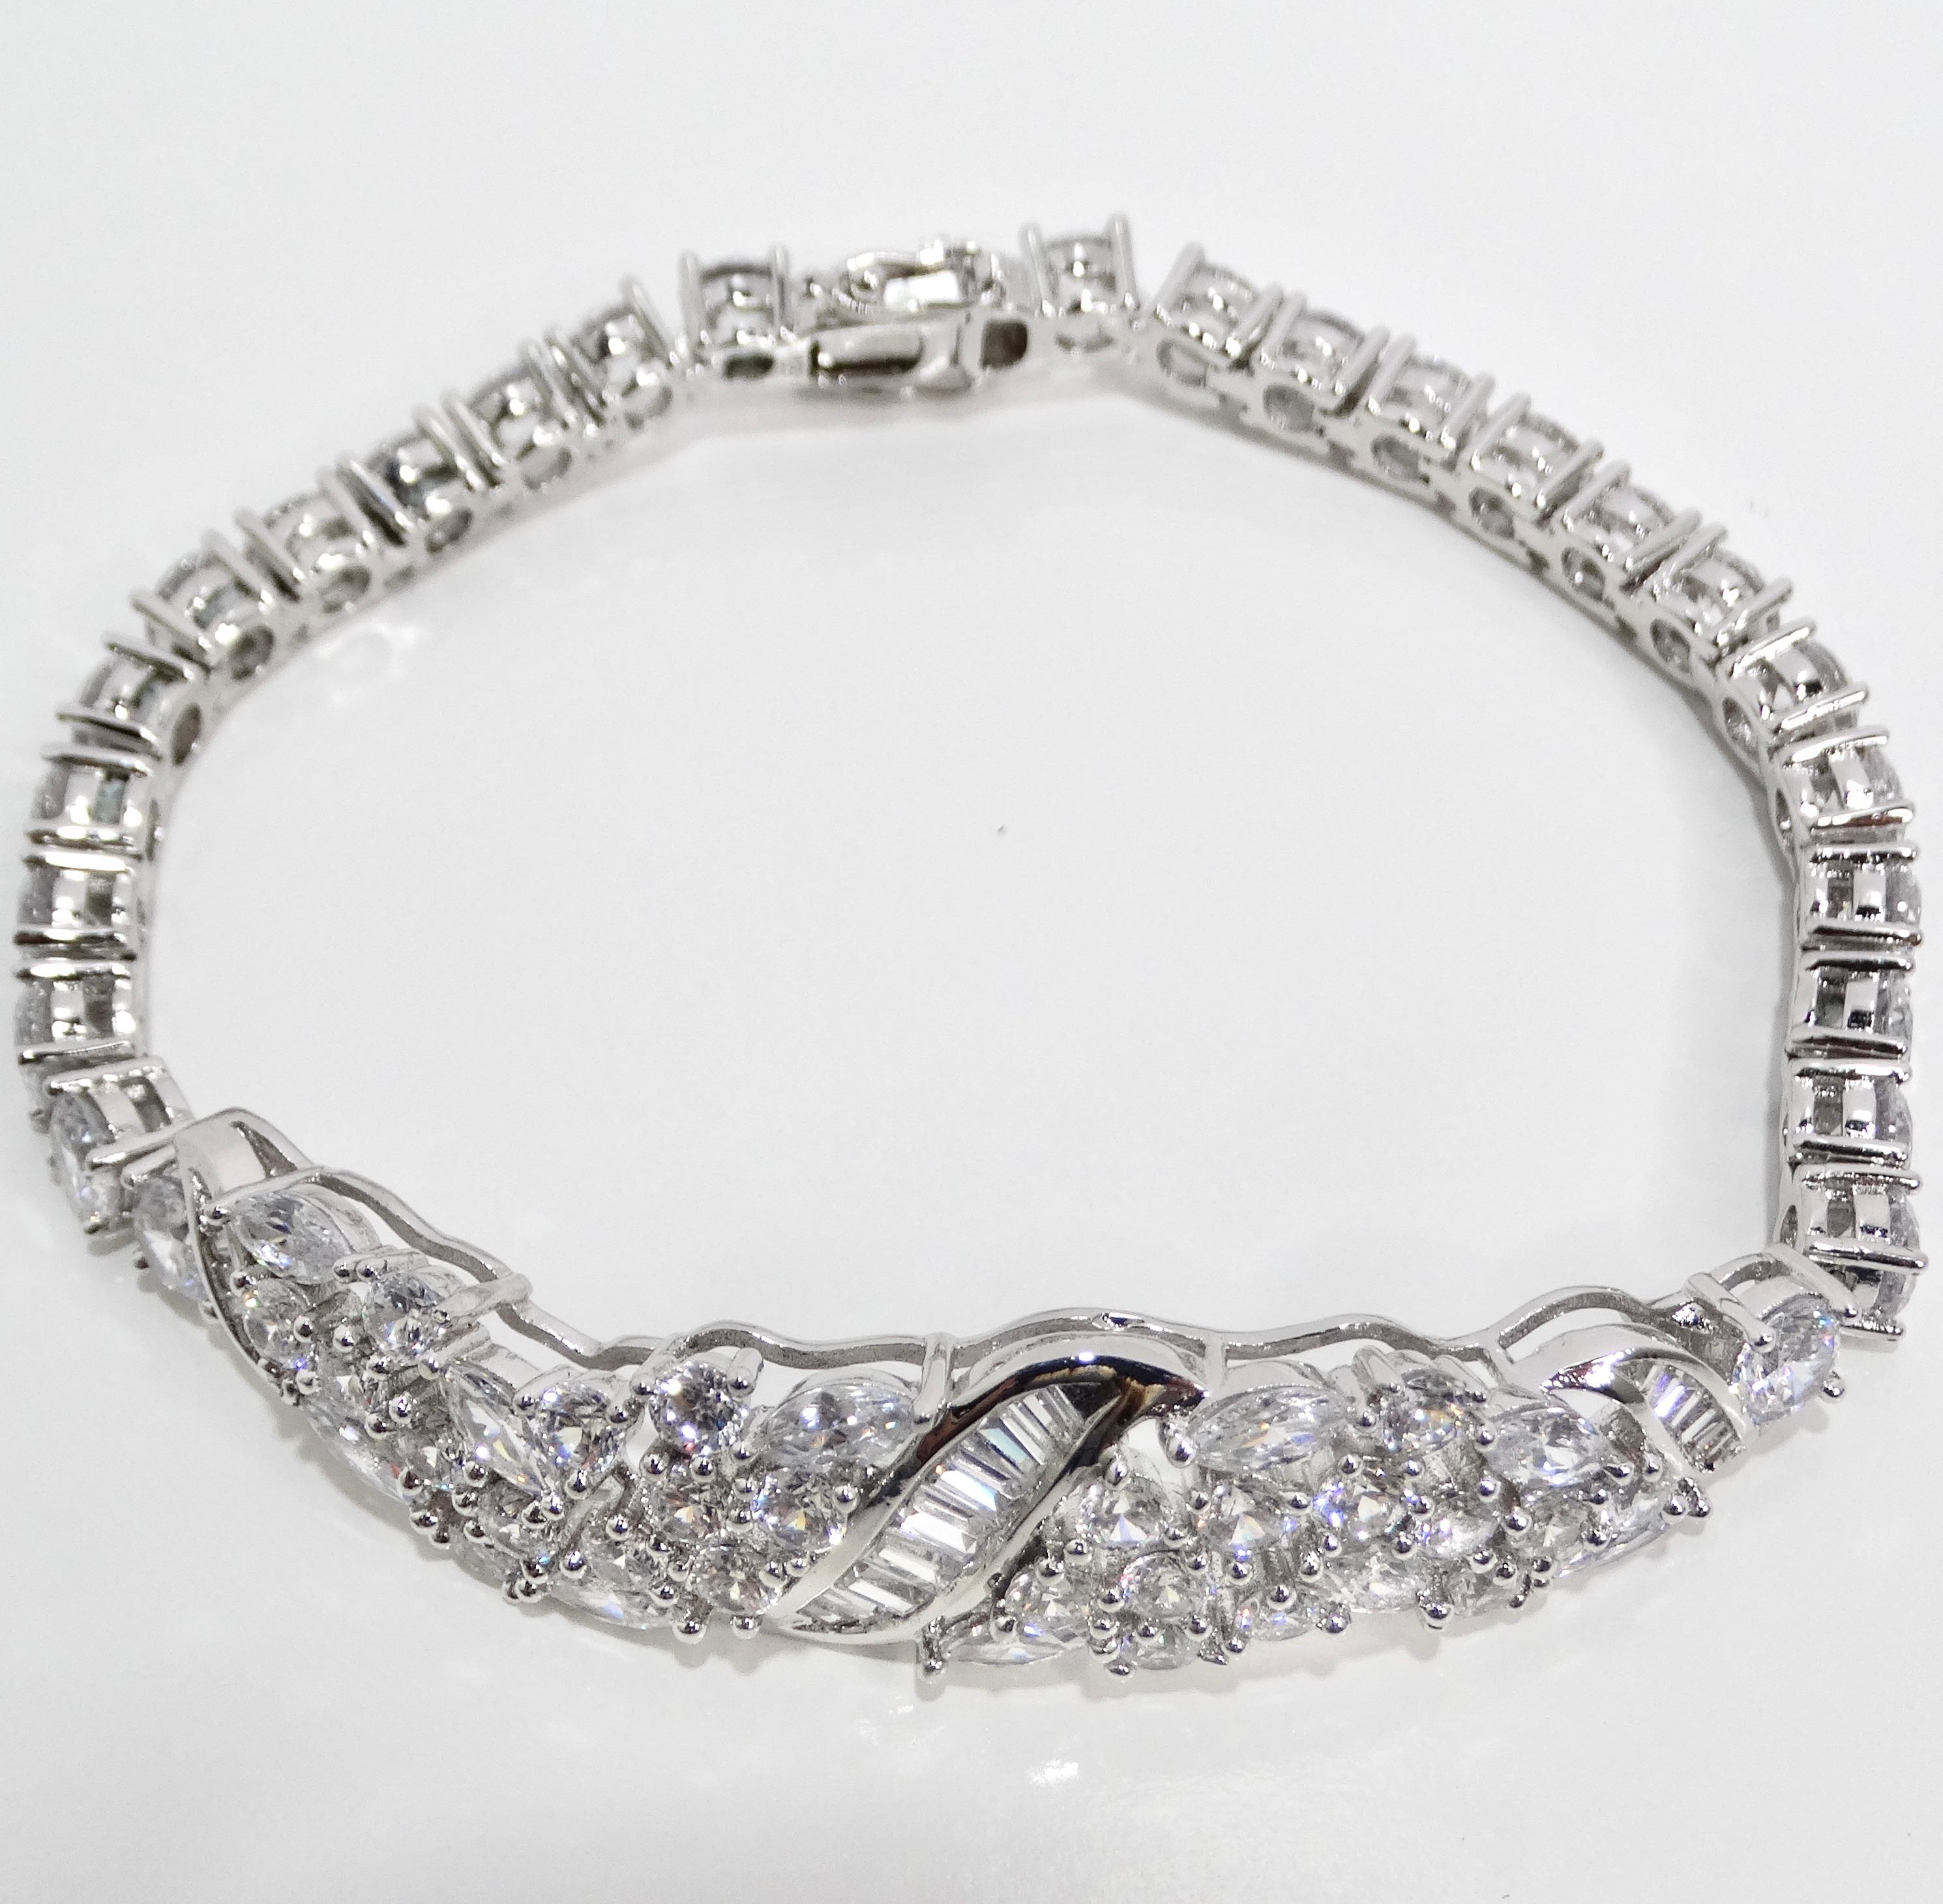 1990s with the Art Deco Silver Rhinestone Bracelet In Excellent Condition For Sale In Scottsdale, AZ